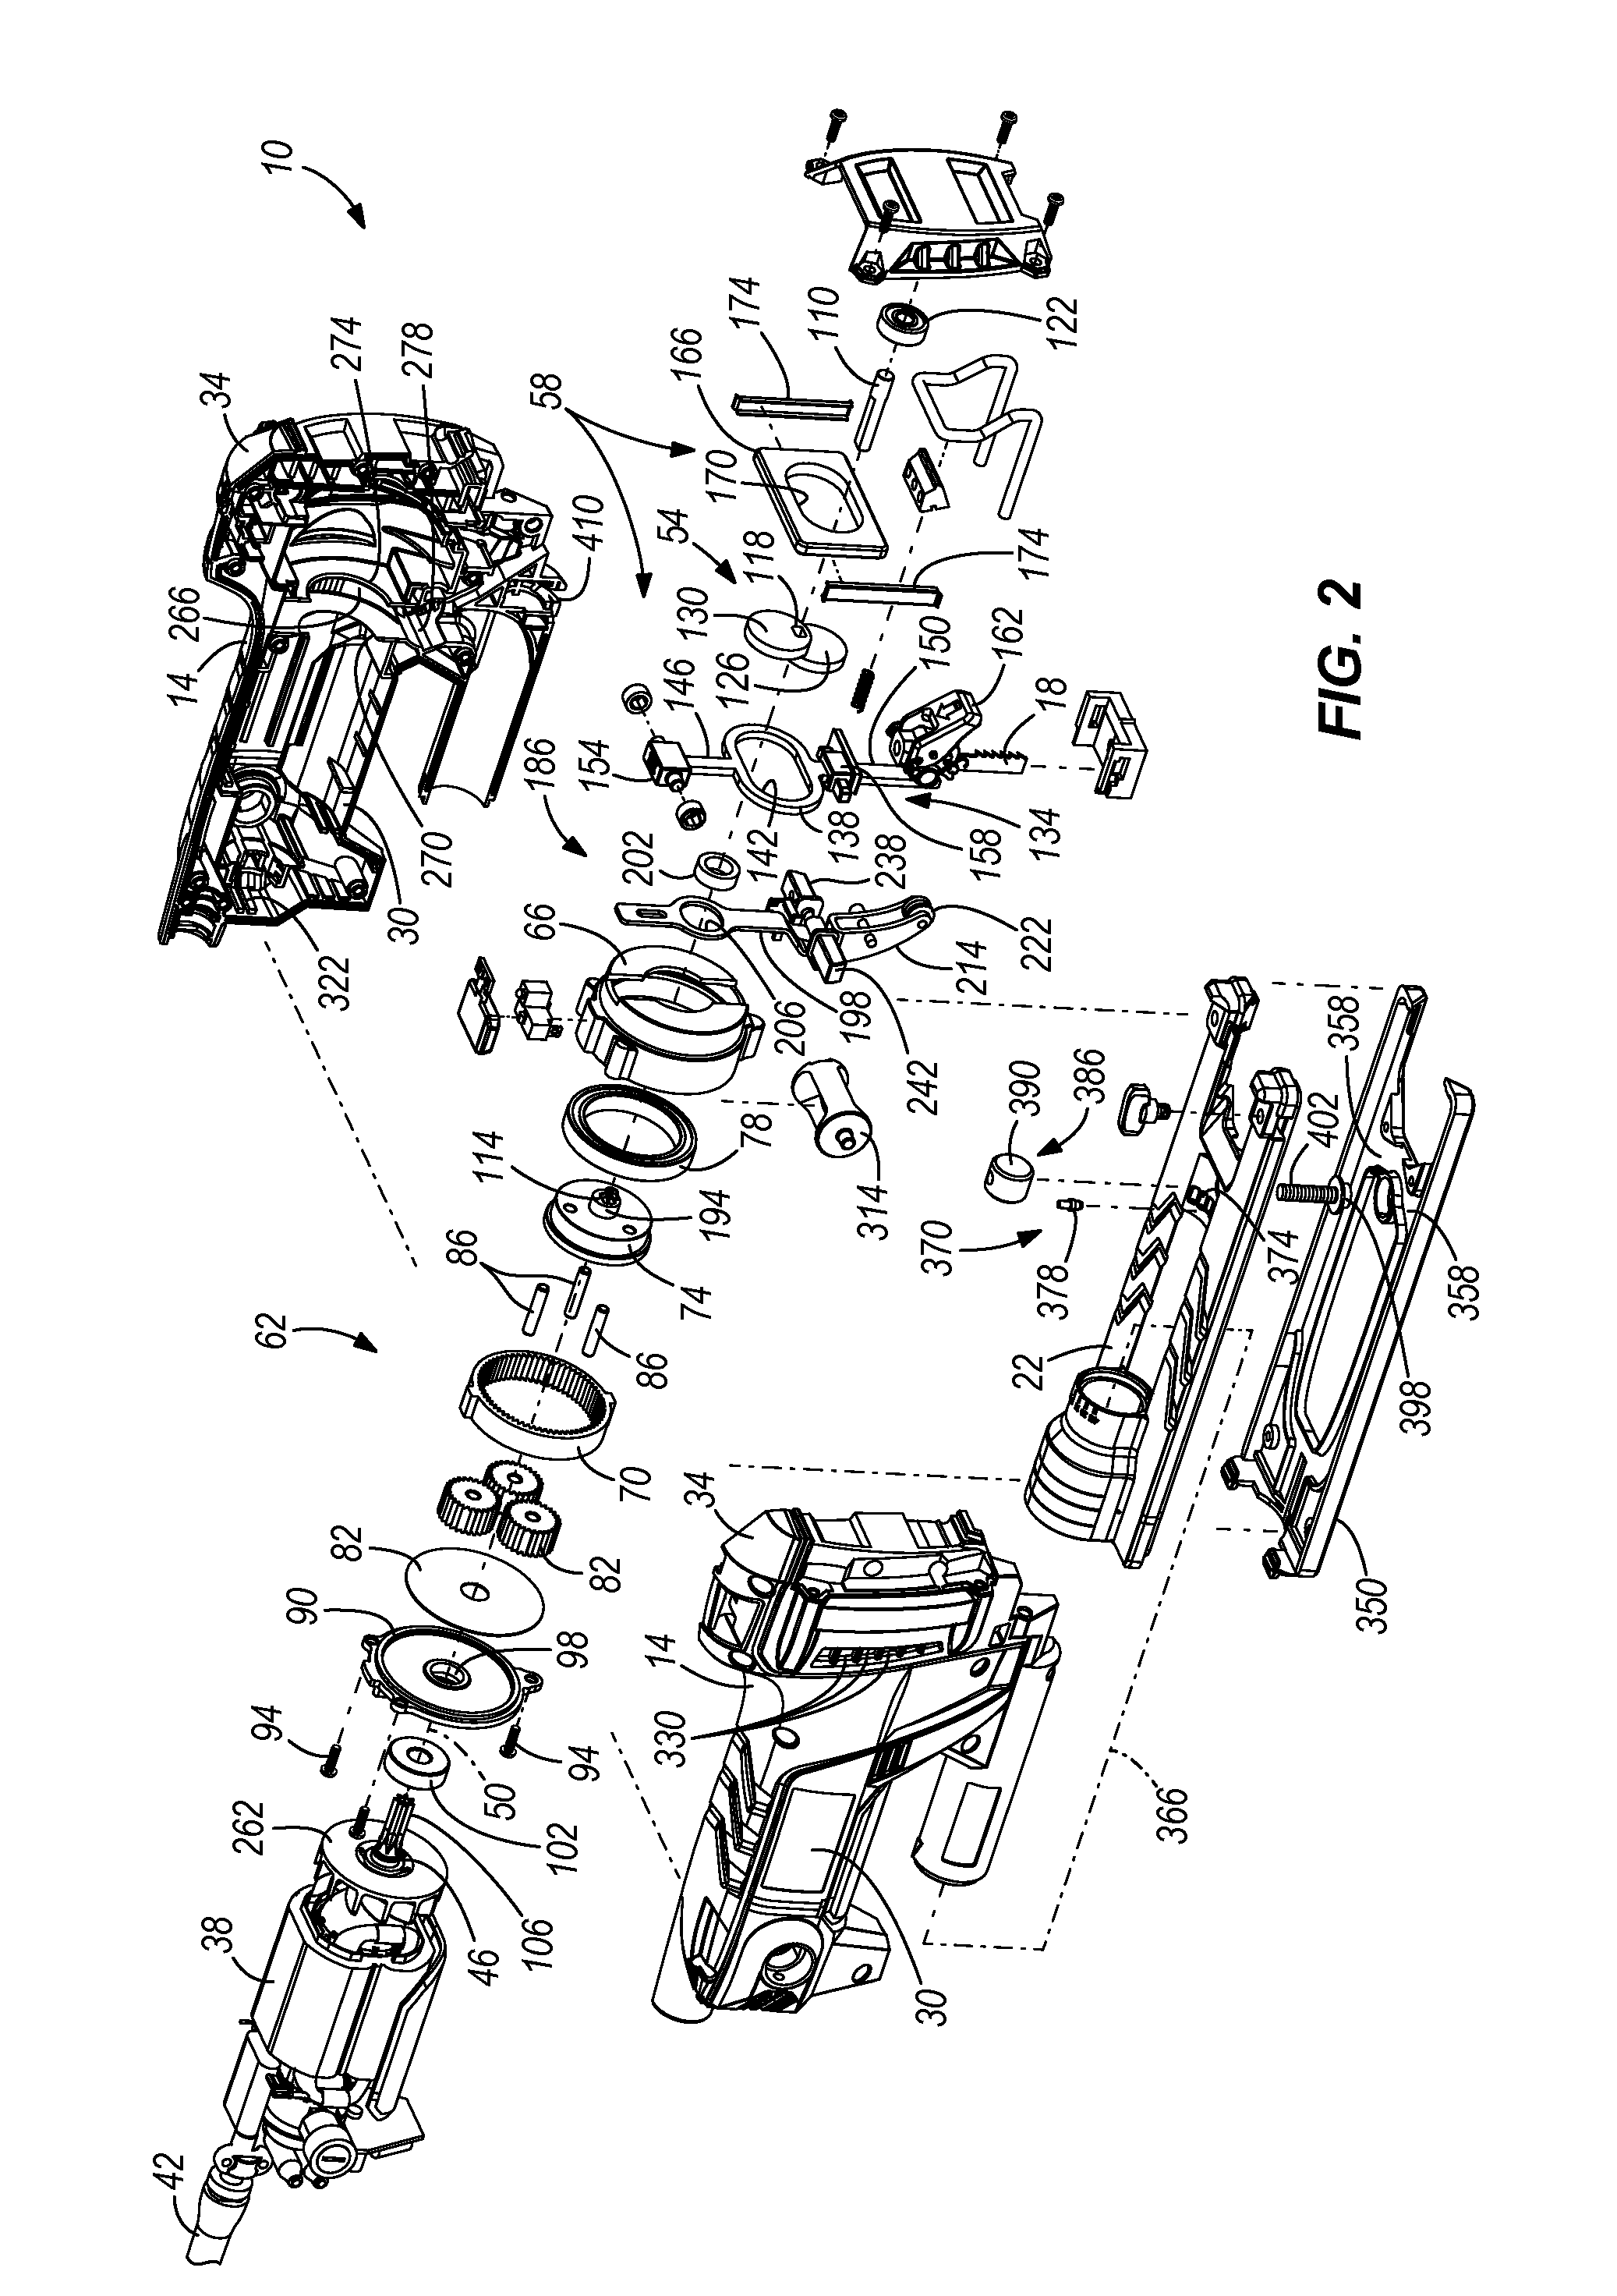 Power tool with reciprocating blade